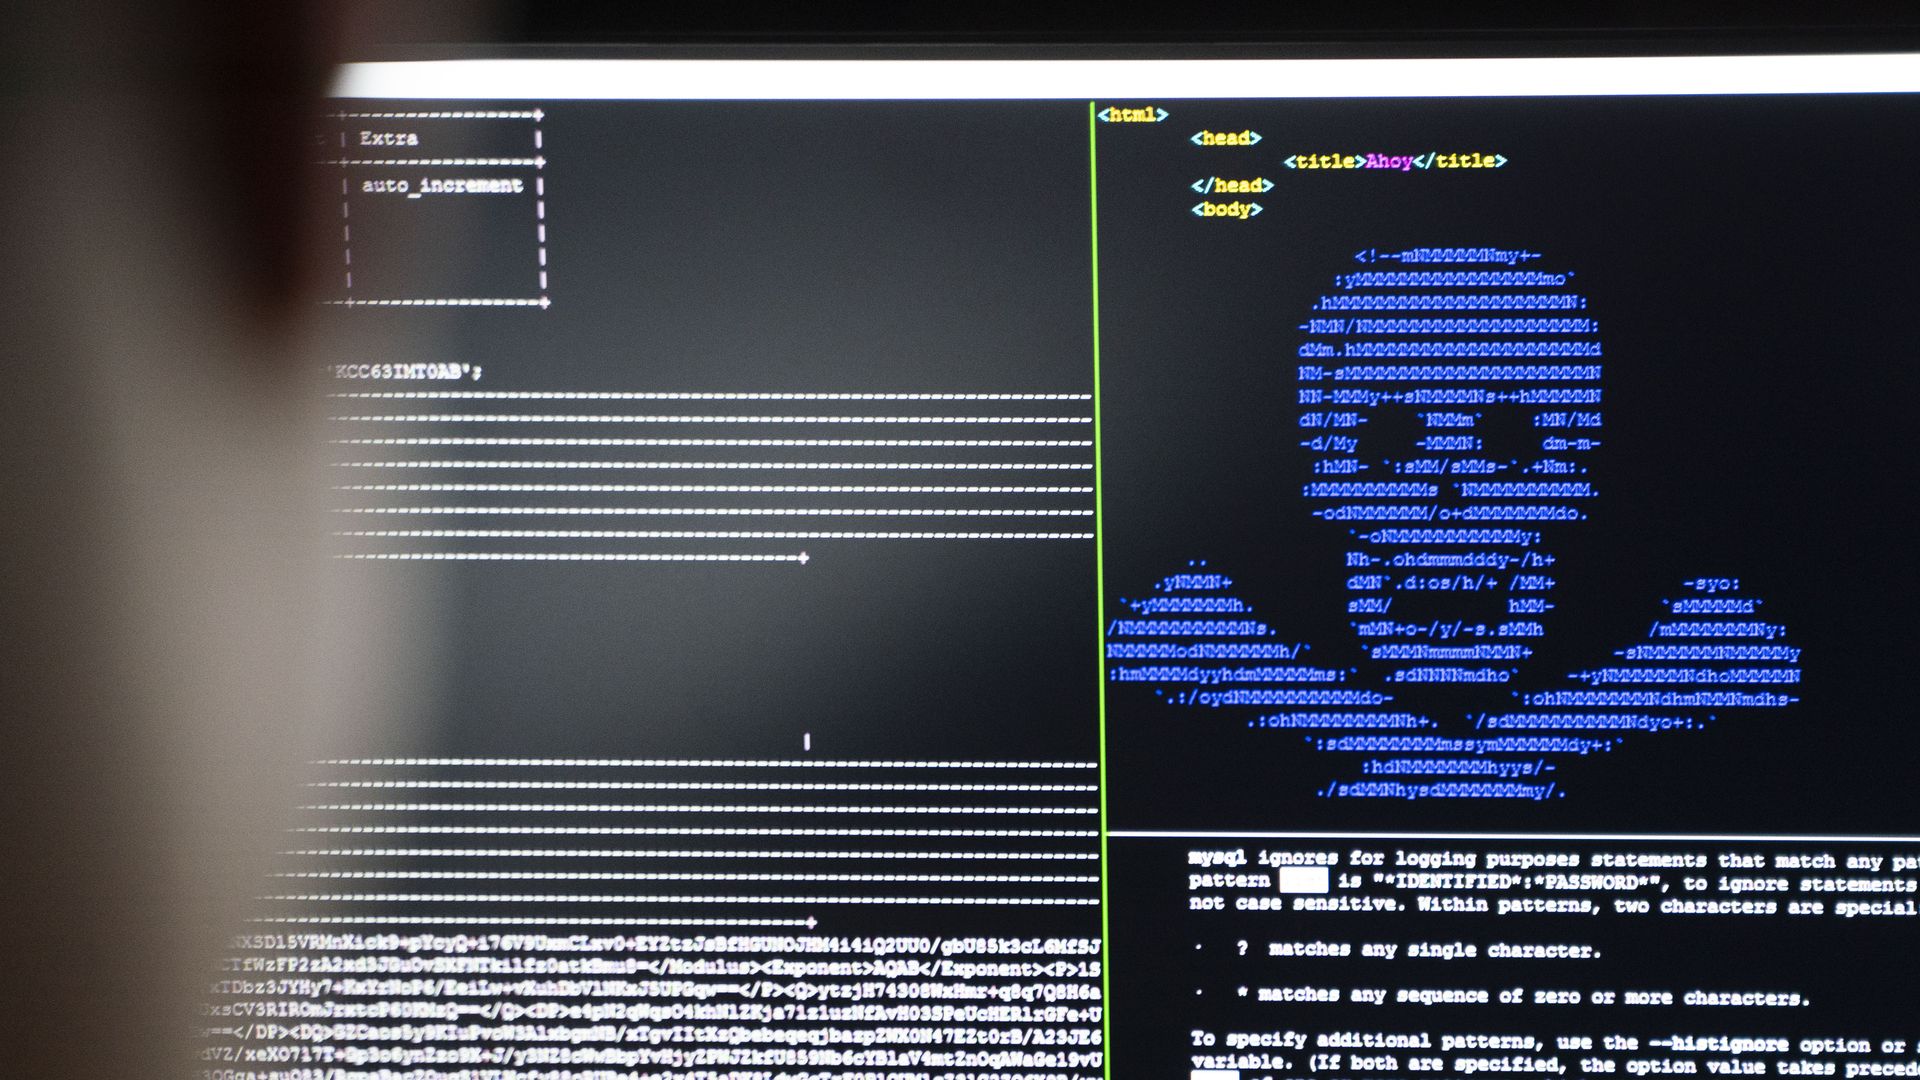 Image of a ransomware note on a computer screen